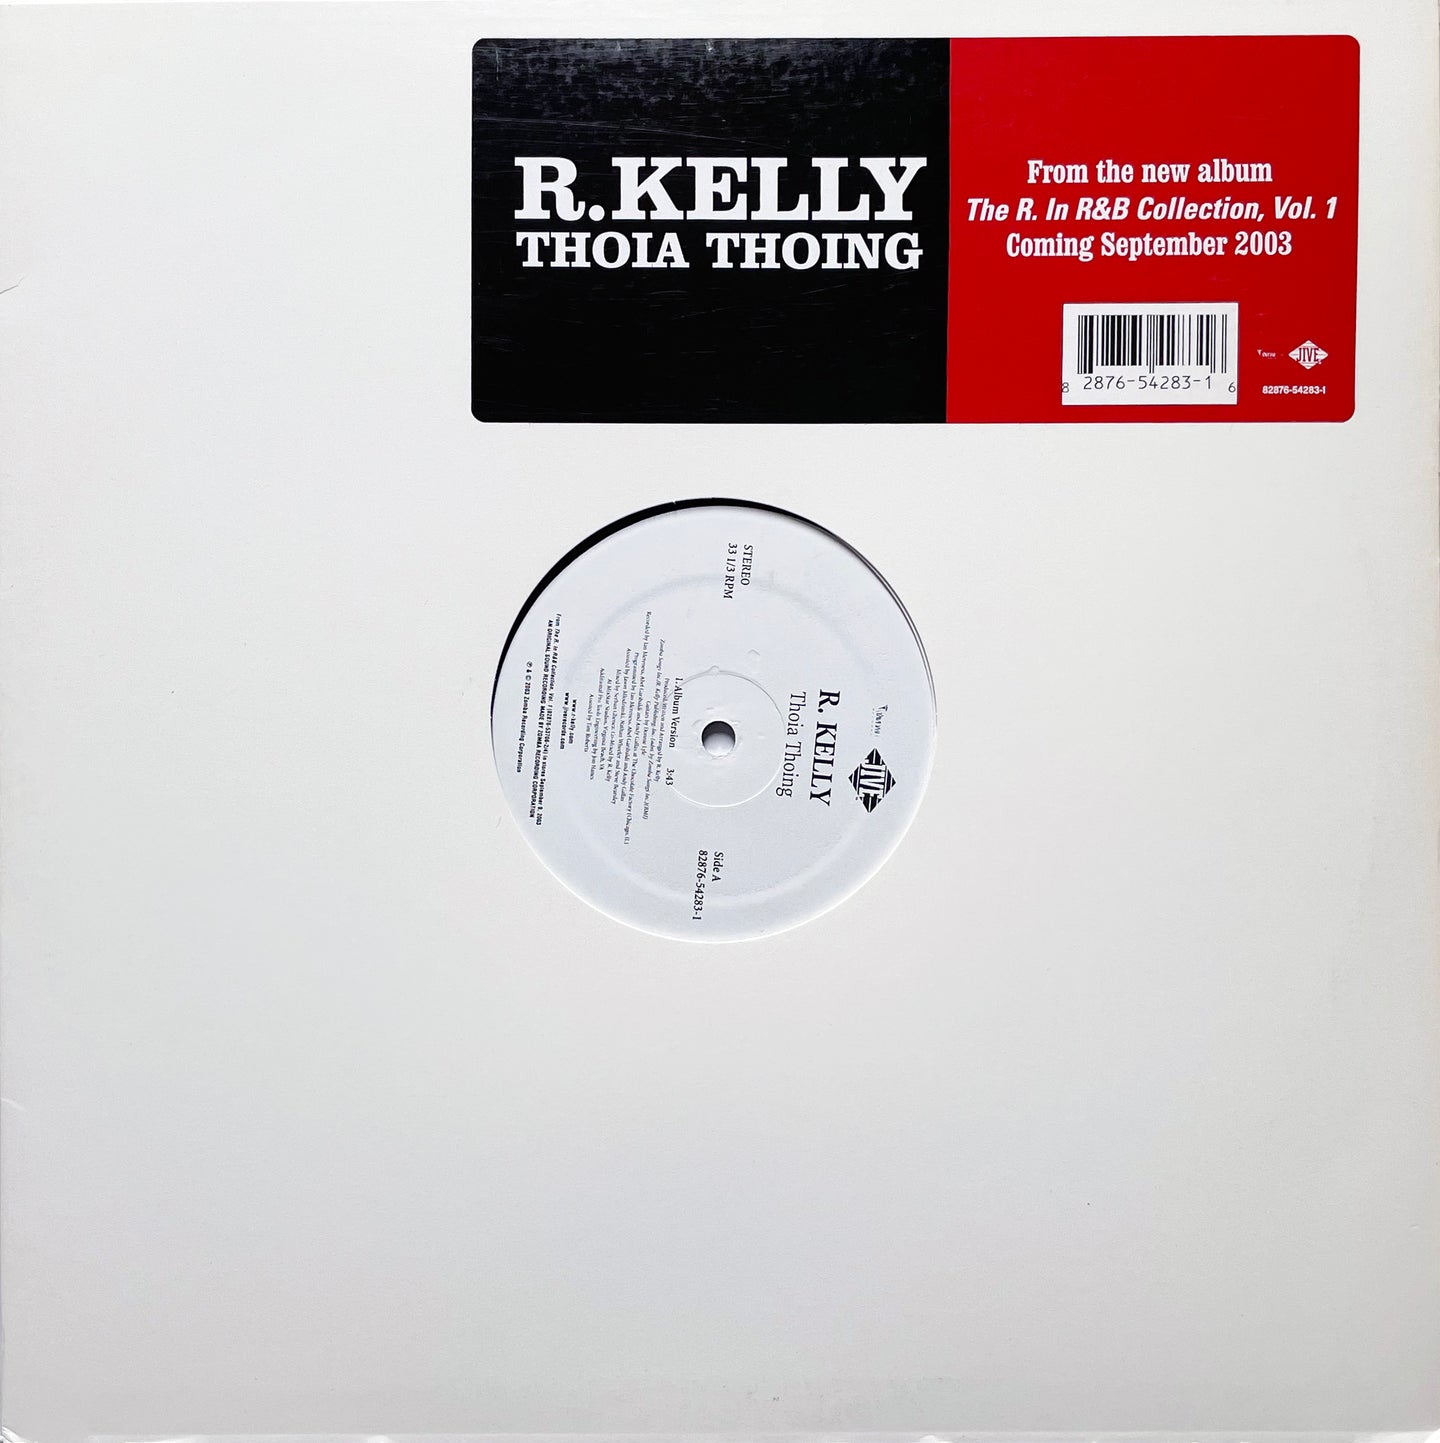 R. Kelly - Thoia Thoing 12